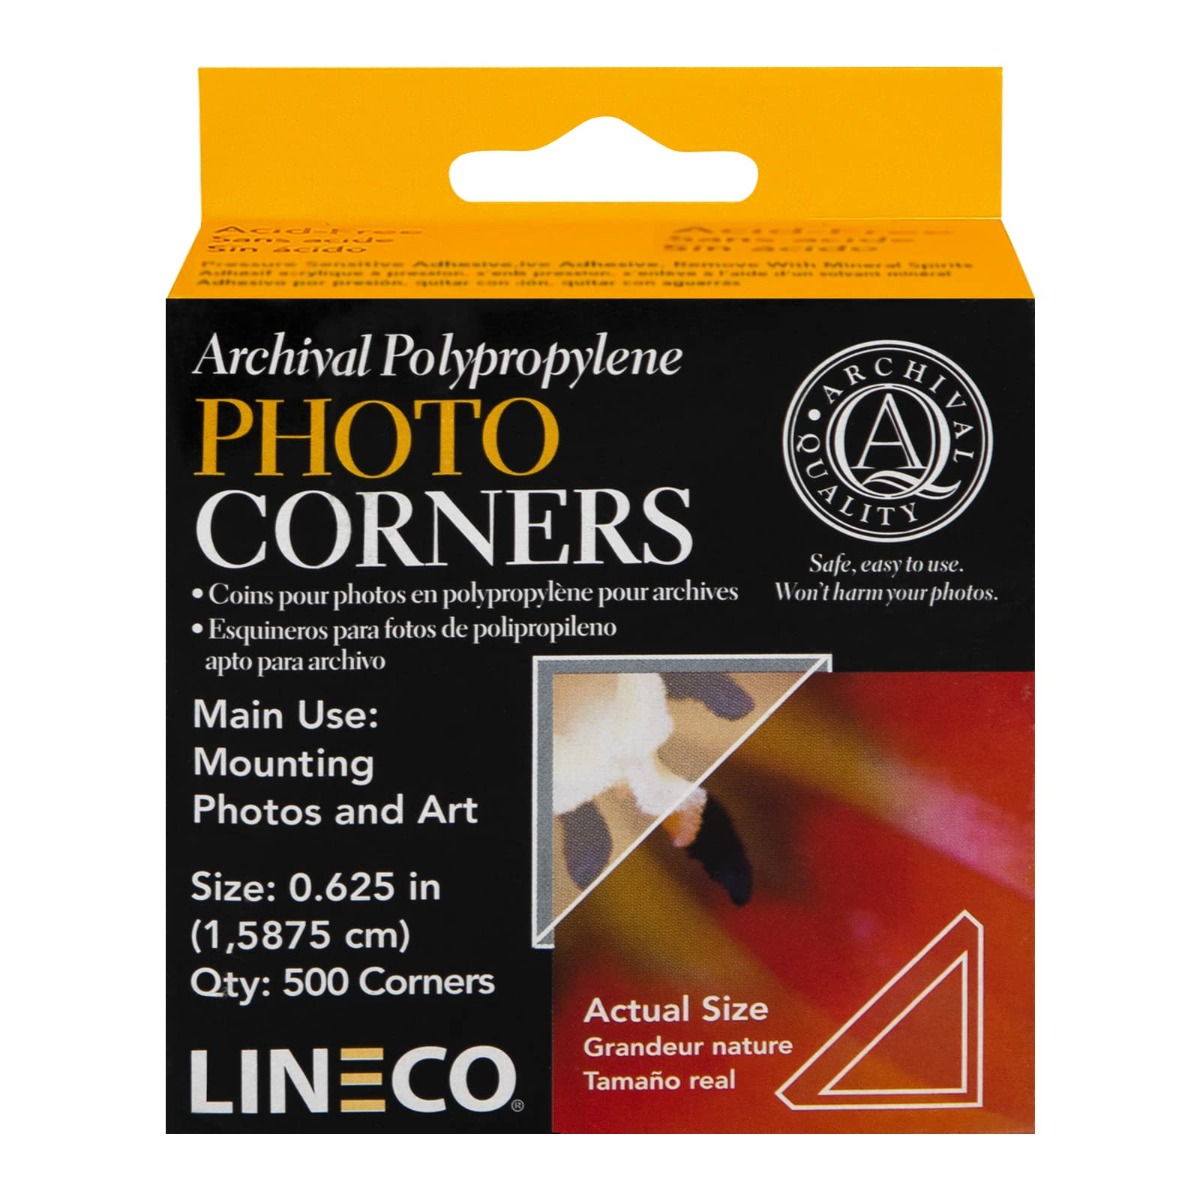 Lineco Self-Adhesive Photo Corners, Archival Quality Acid-Free Pressure  Sensitive, 0.5 Inch, Useful for Scrapbooking Mounting on Mat Boards DIY  (Pack